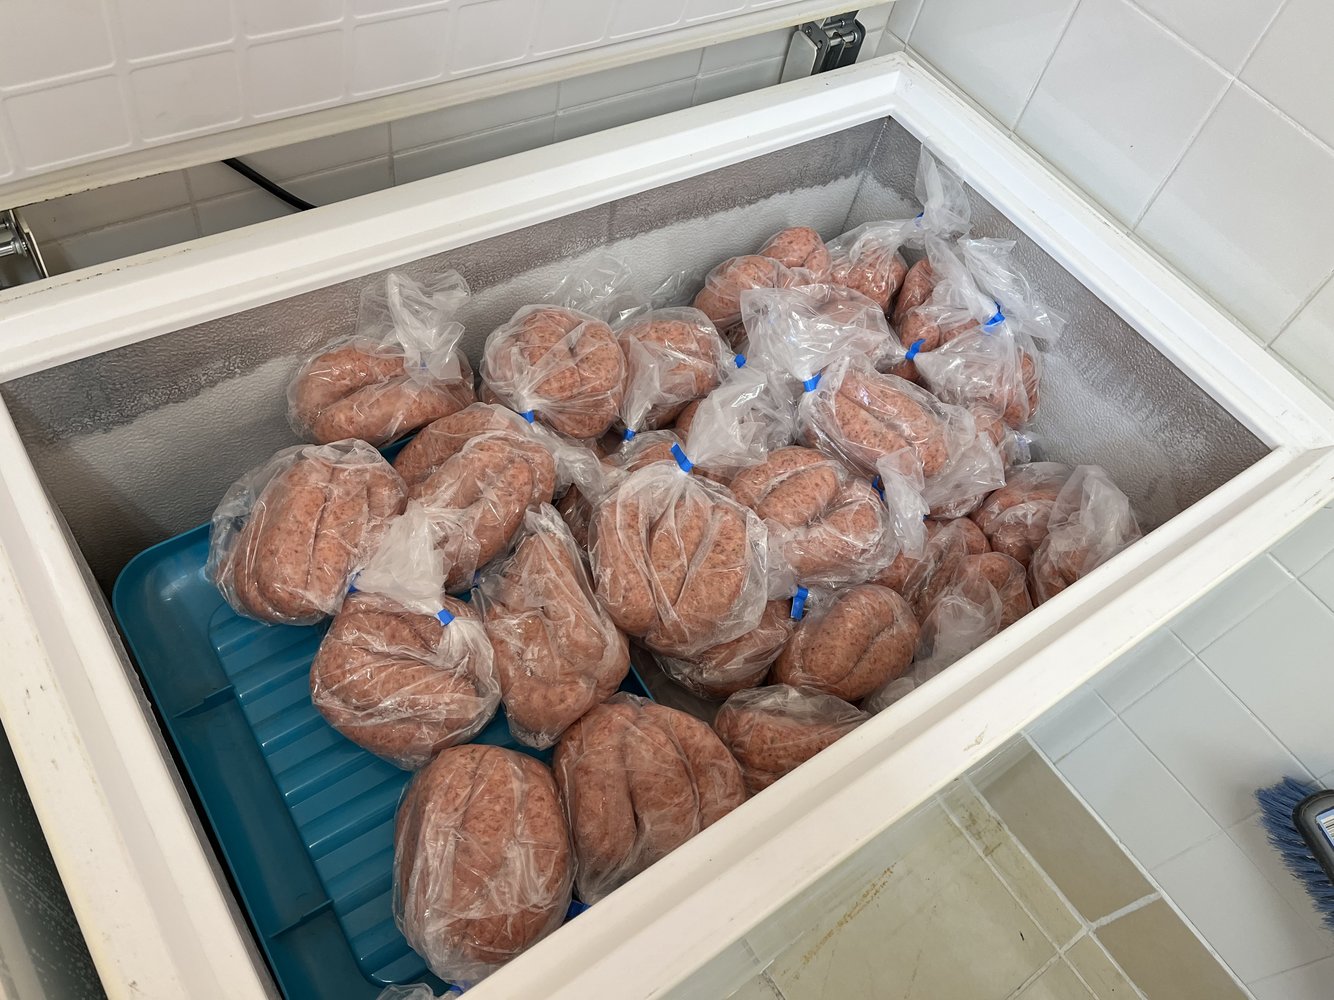 Chest-Freezer-Full-Of-Sausages-And-Burgers.JPG